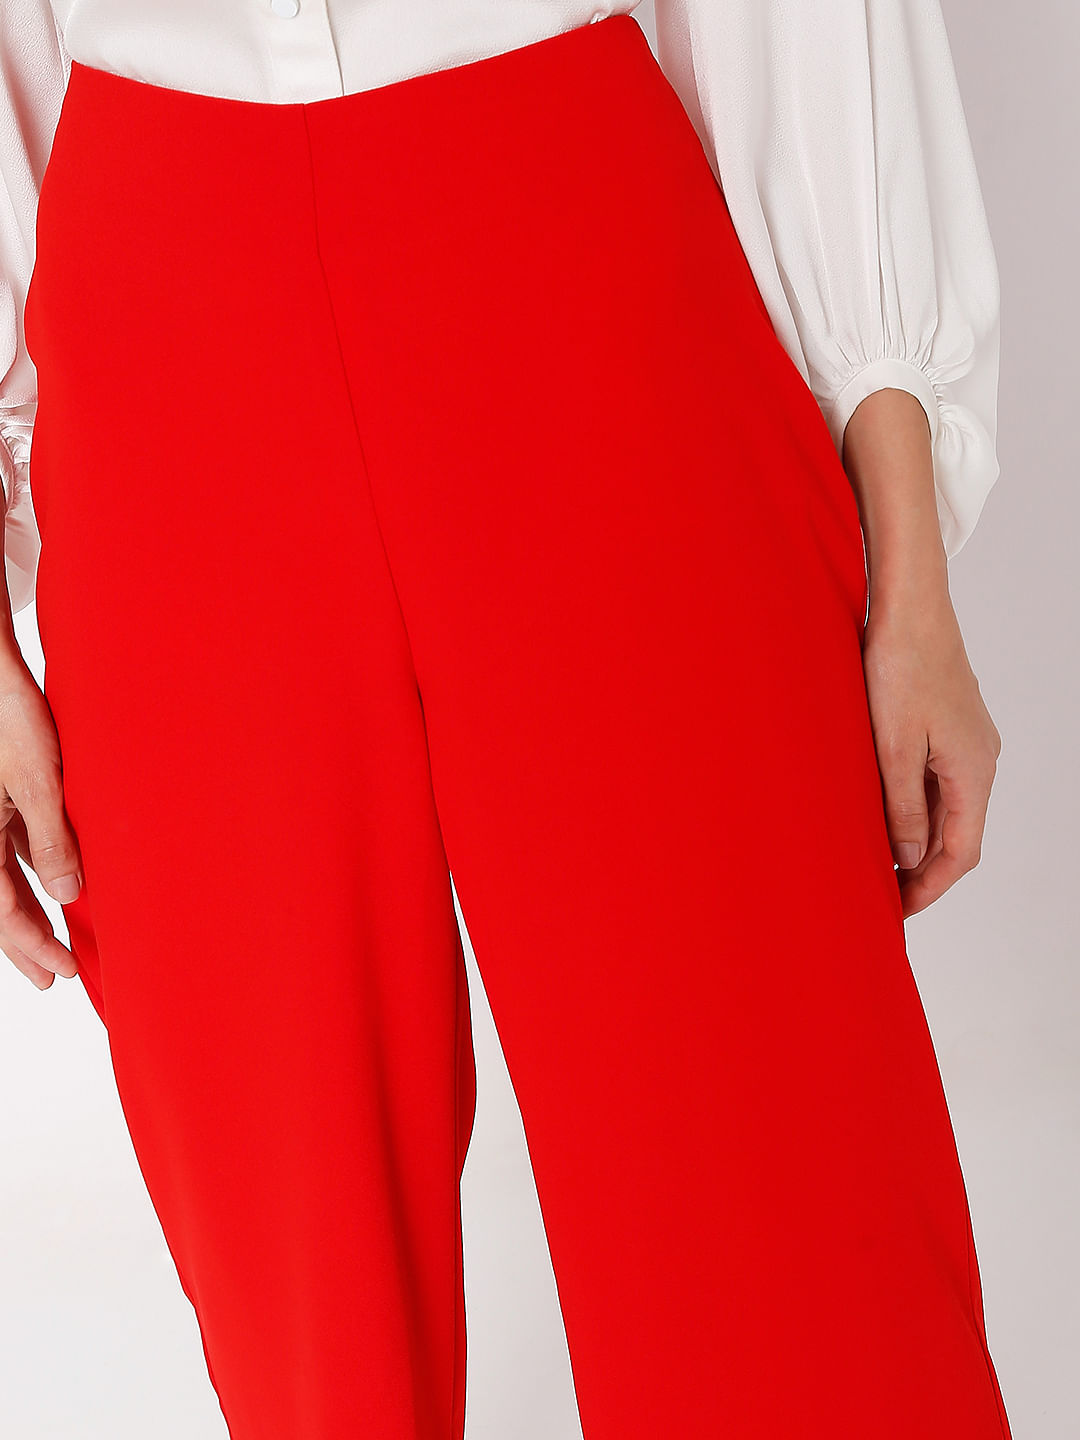 Women Red Jeans  Buy Women Red Jeans online in India